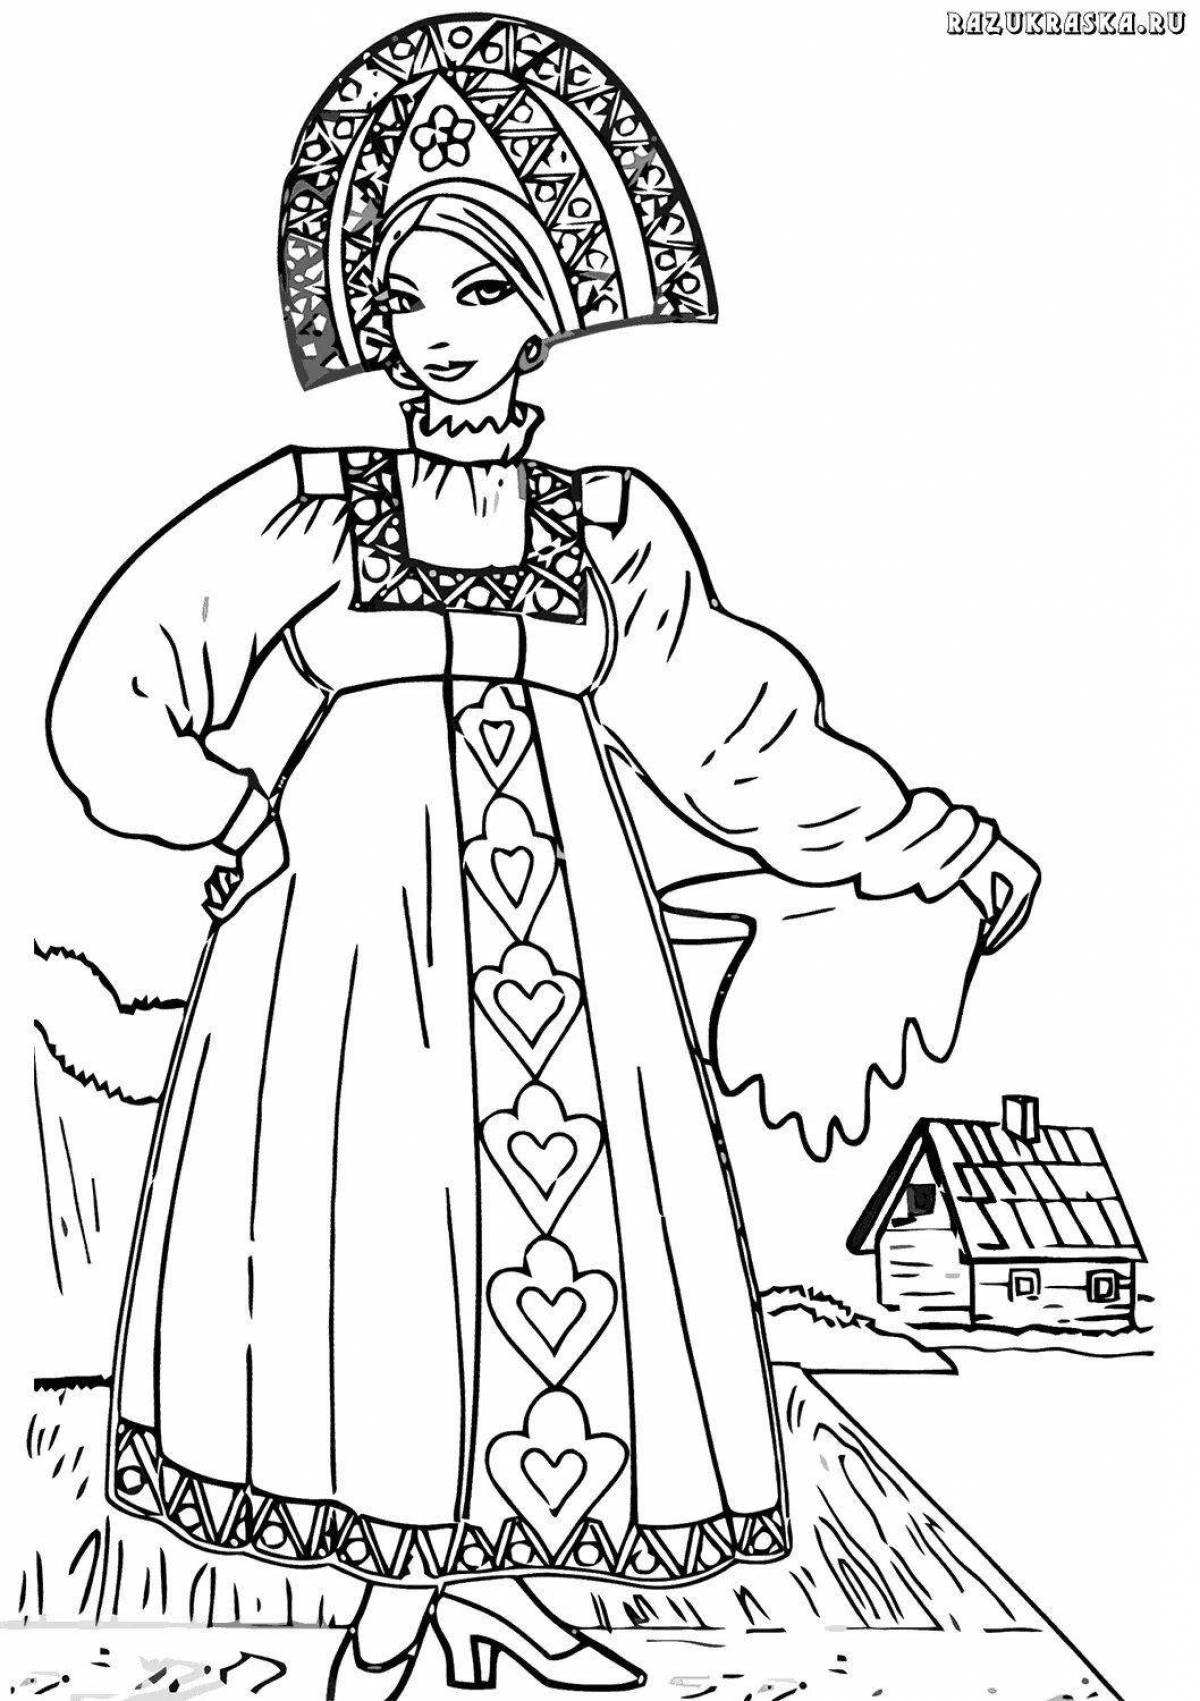 Exquisite Russian national costume for children